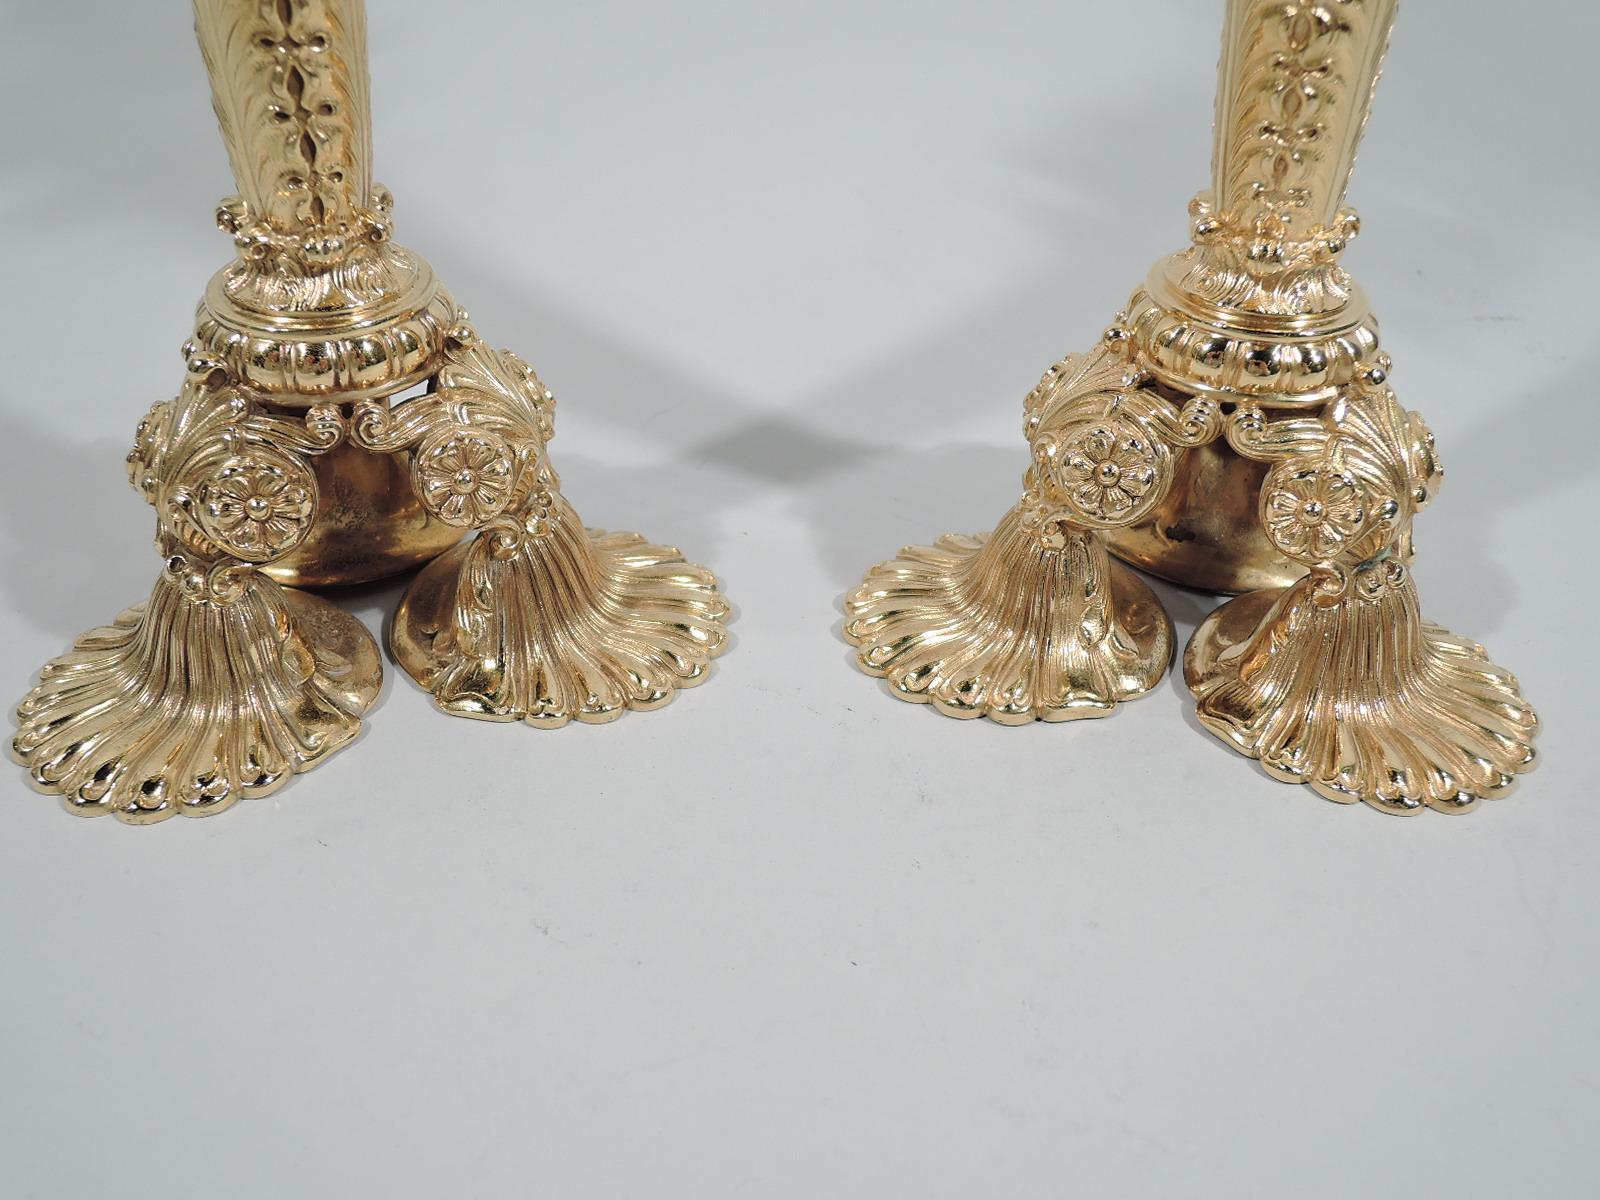 Pair of Tiffany Exuberantly Classical Paris Exposition Universelle Candlesticks 1